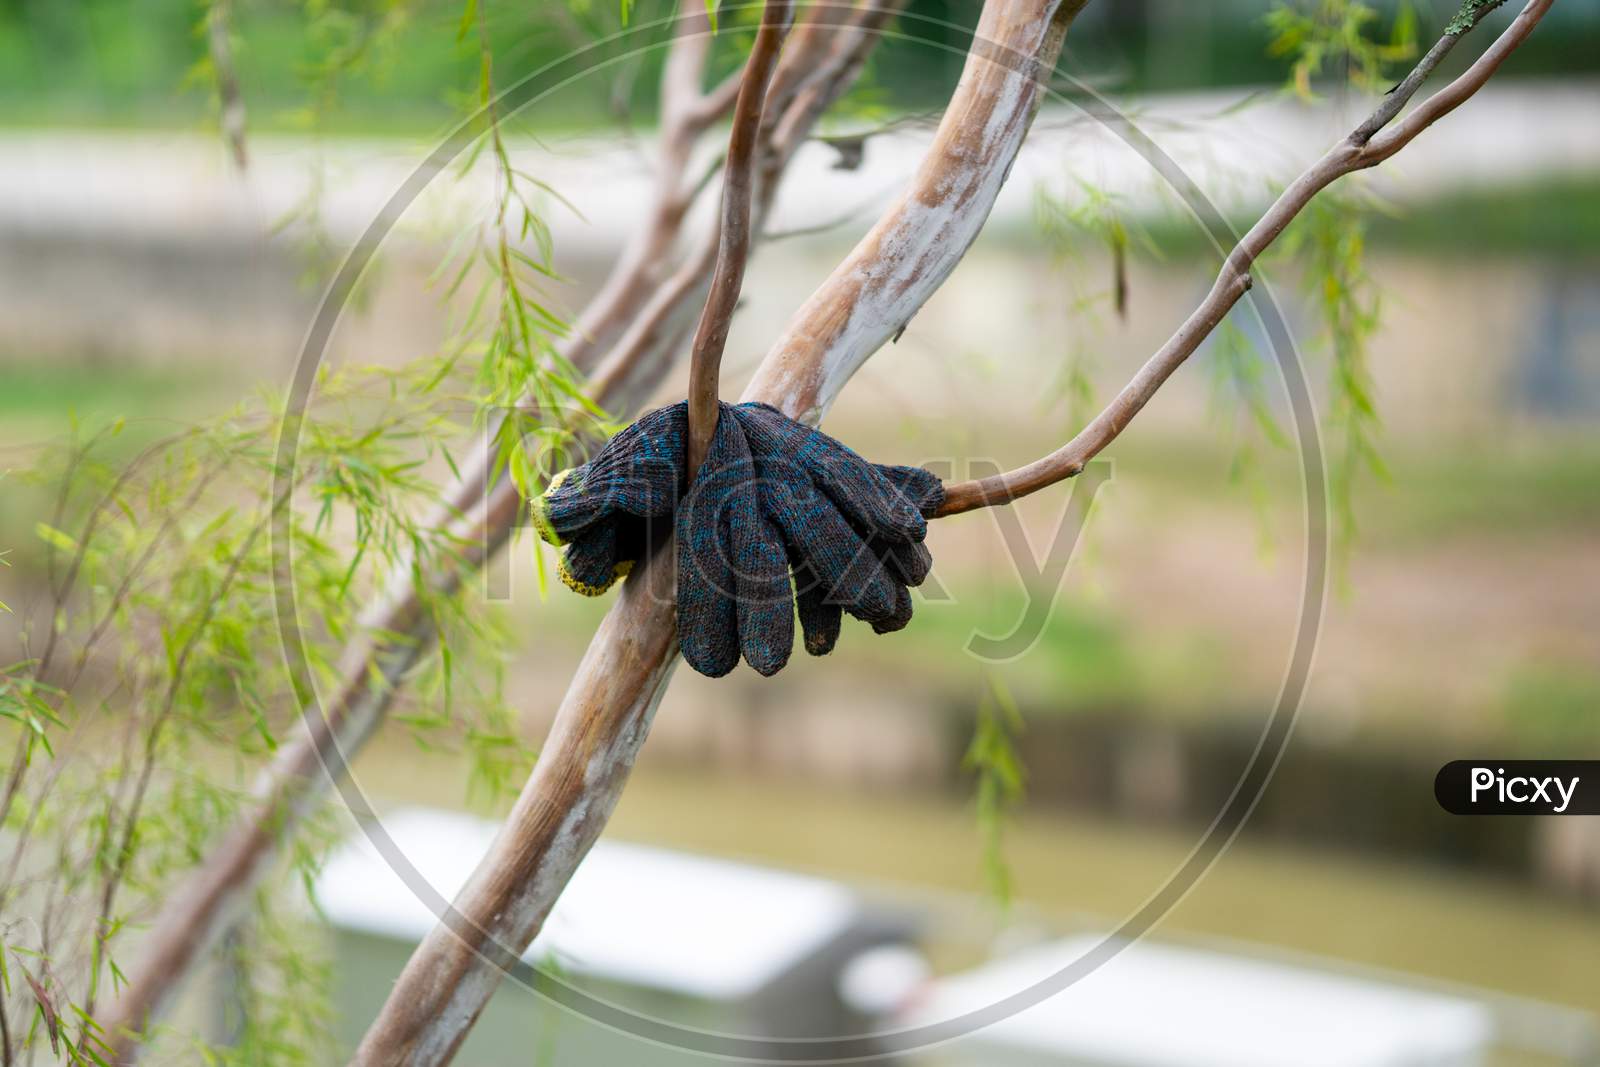 Workers Hand Glove Kept Hanging On A Tree Branch